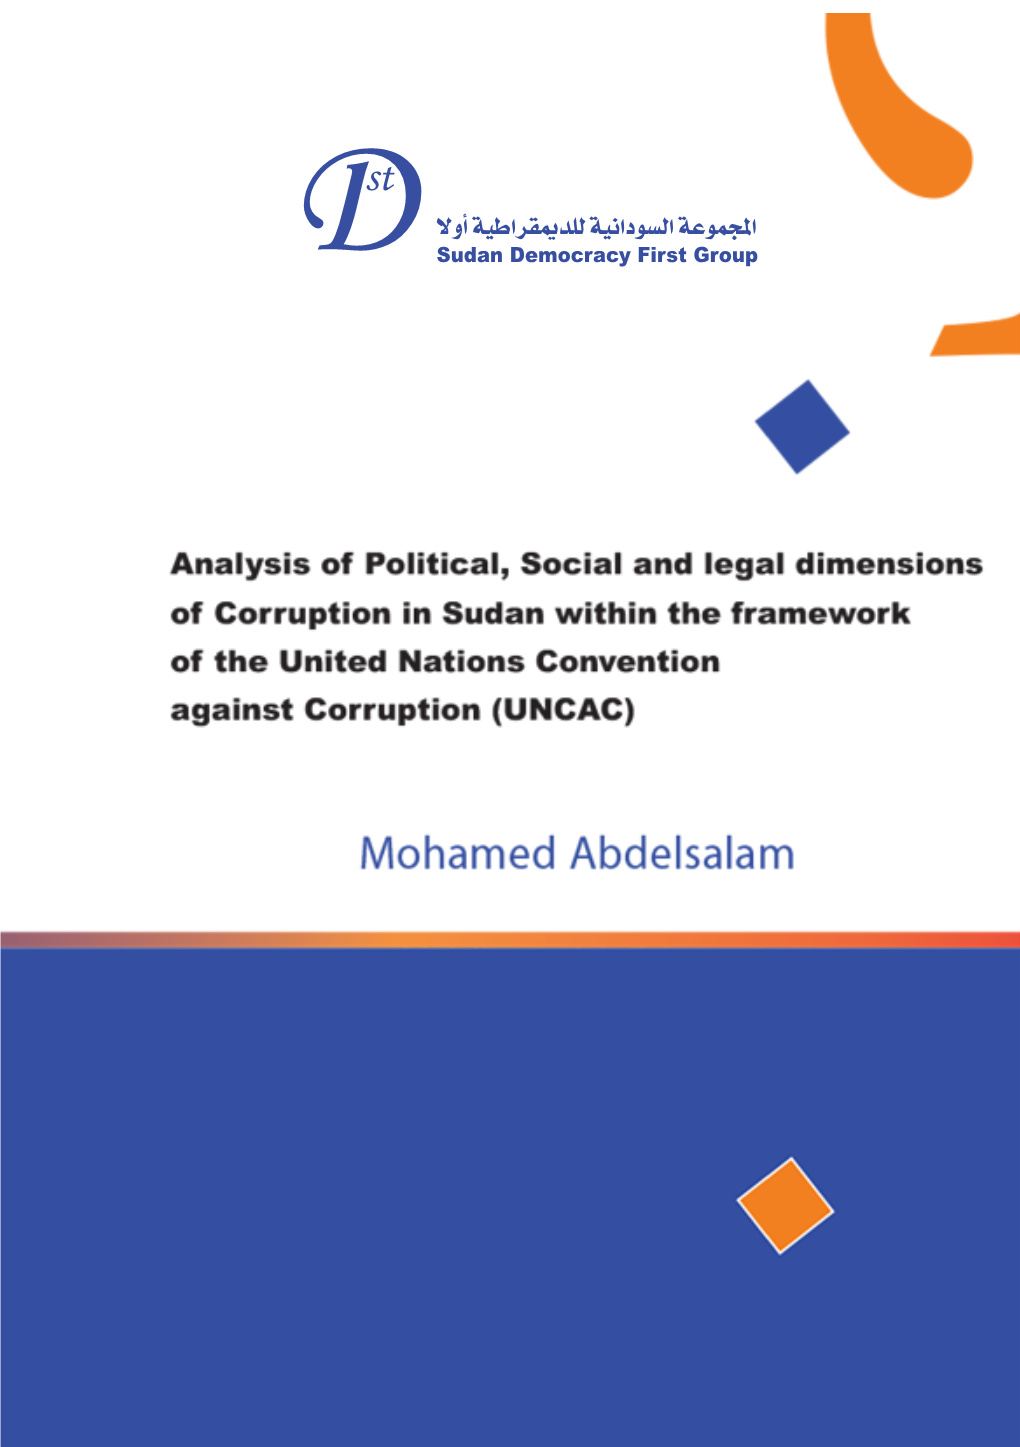 Analysis of Political, Social and Legal Dimensions of Corruption in Sudan